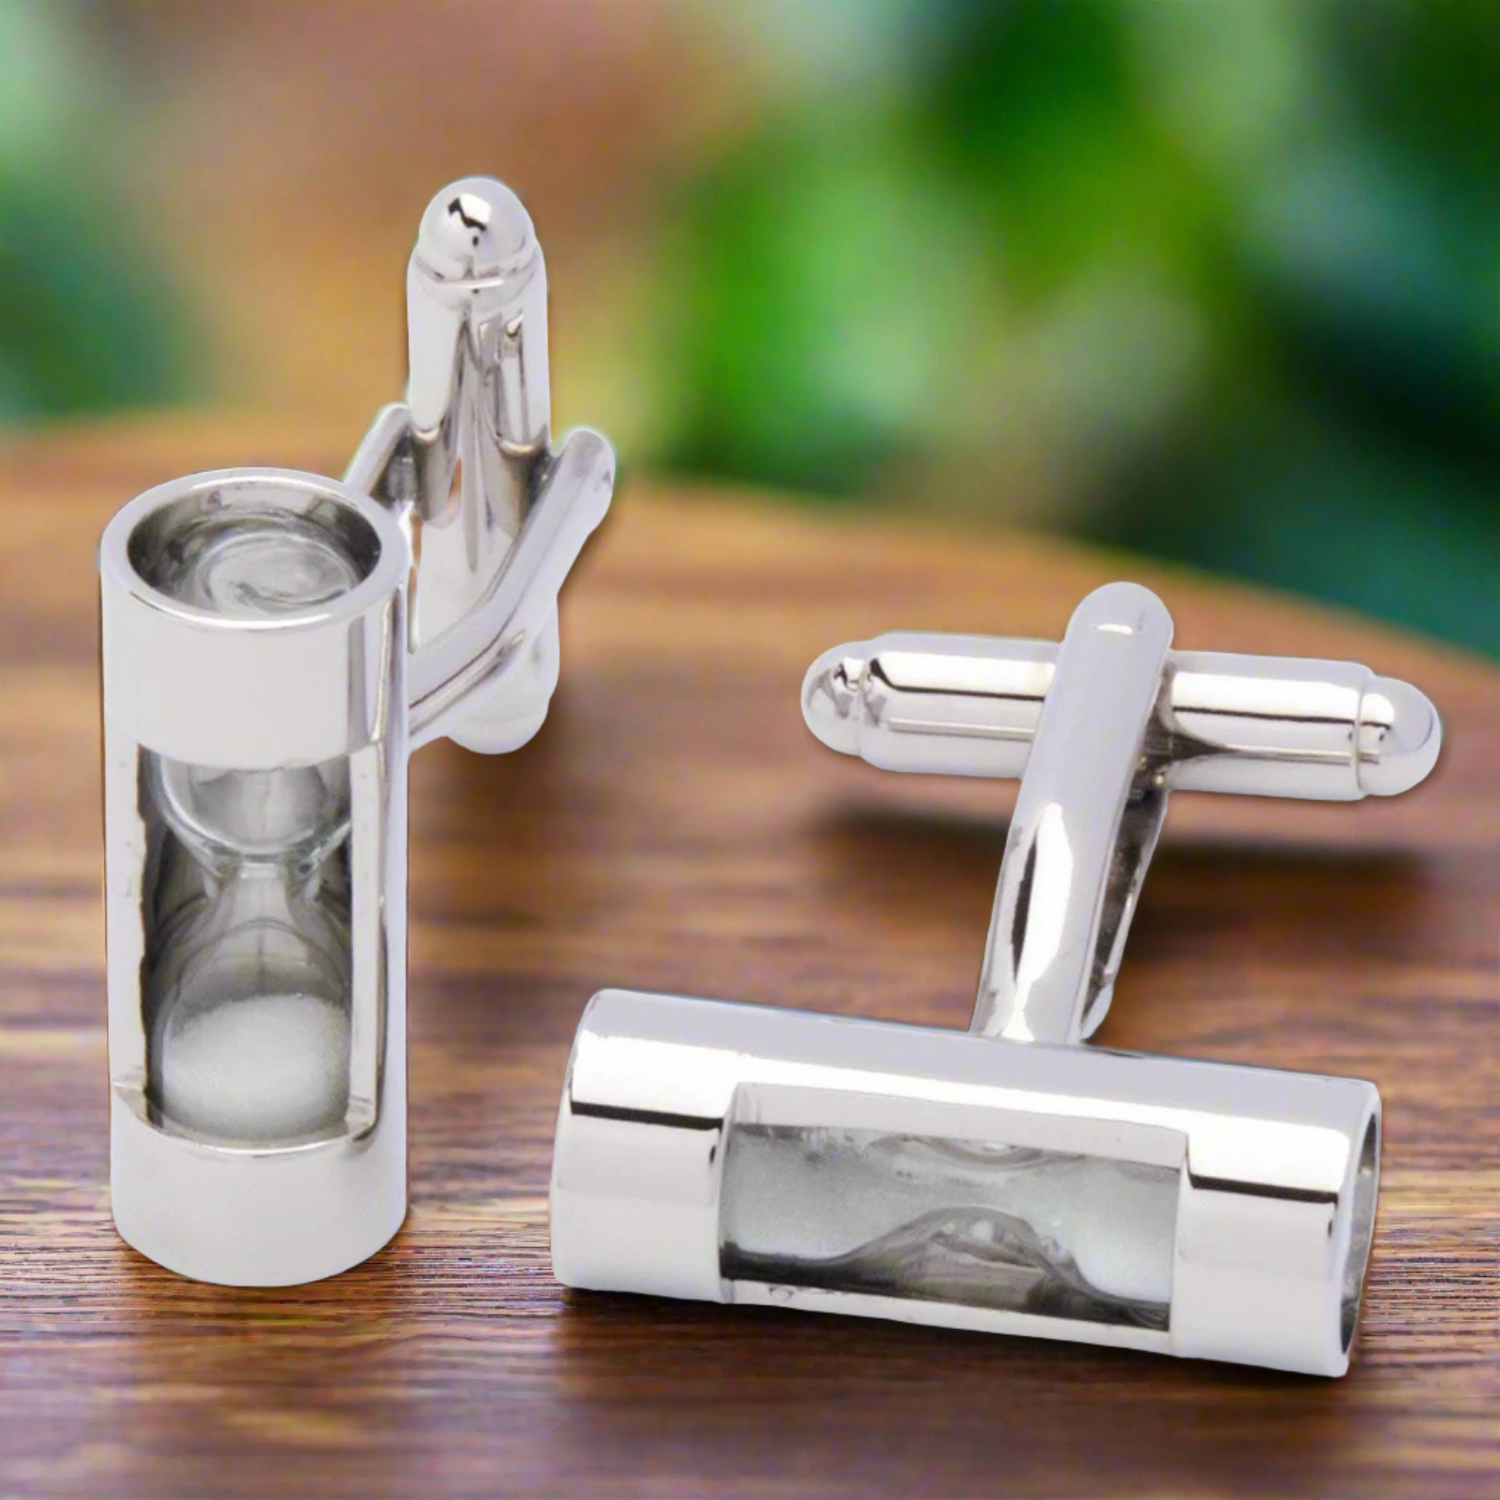 View 3 A chrome and white colored hour glass shape cuff-links set||White Sand